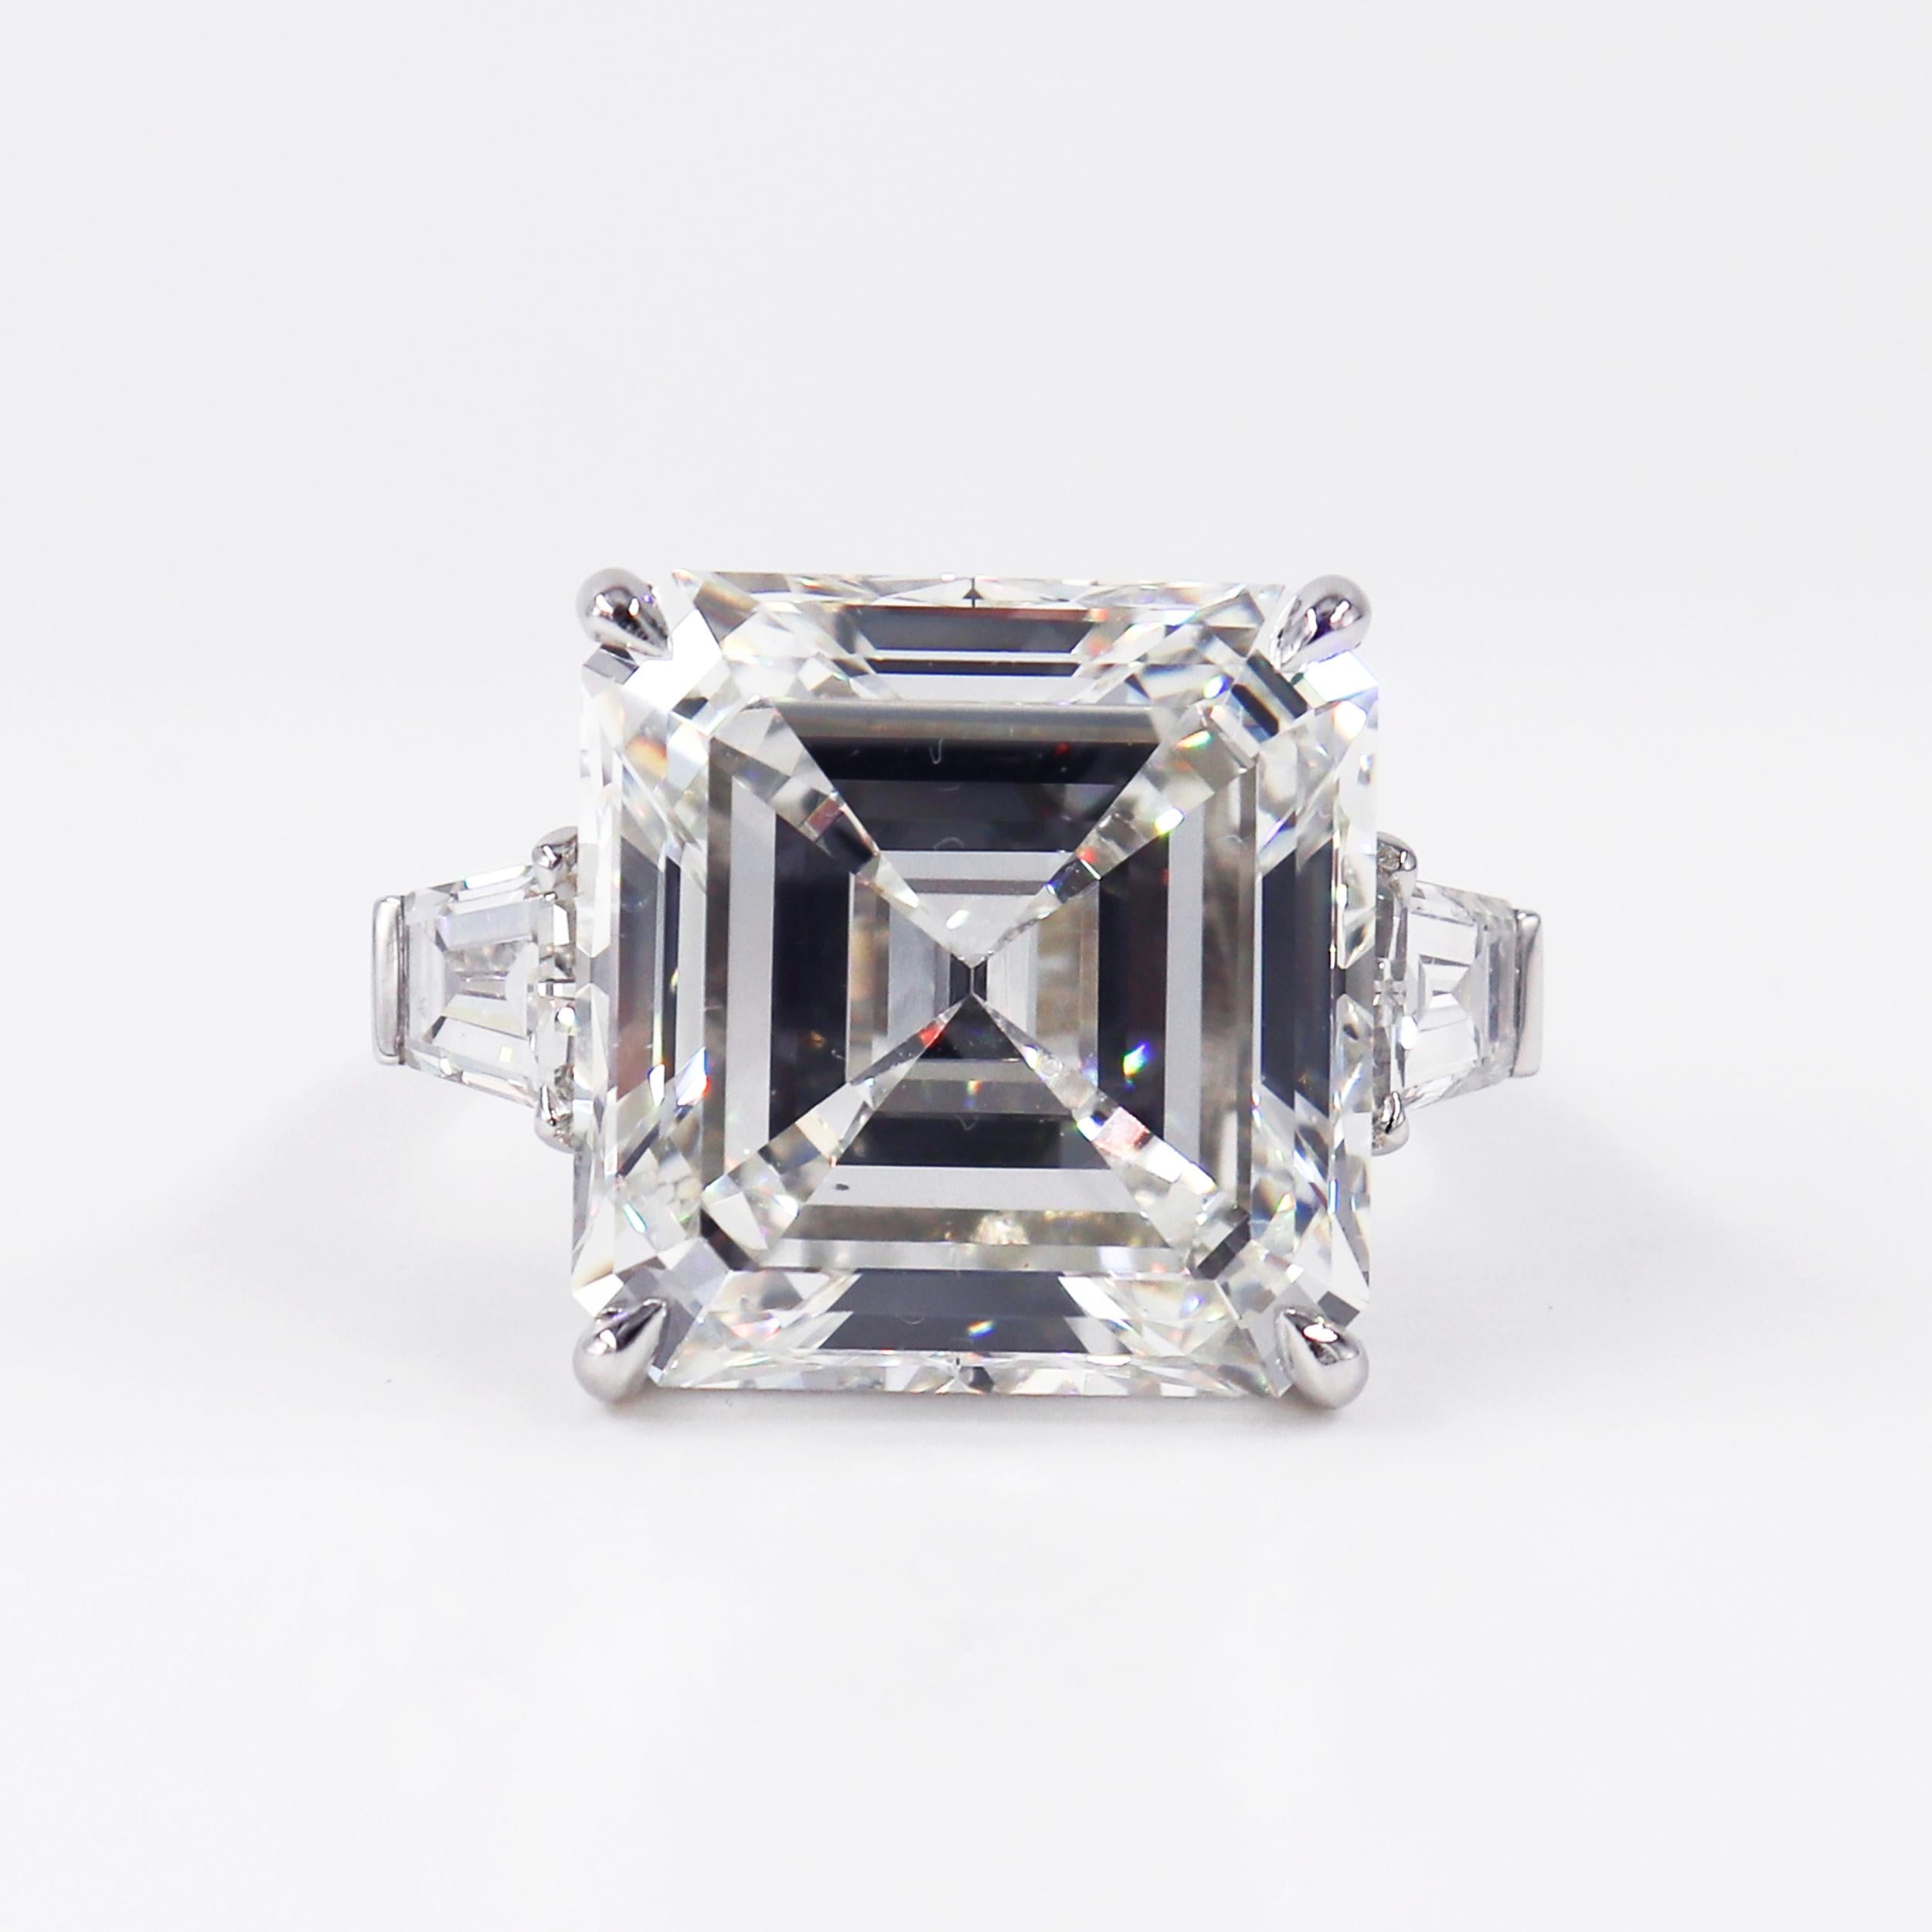 A truly spectacular piece featuring a treasure from the J. Birnbach vault. This magnificent ring features a 21.13 carat GIA certified Asscher cut of H color and VS1 clarity. Tapered baguettes are a timeless accent to the center diamond-this pair